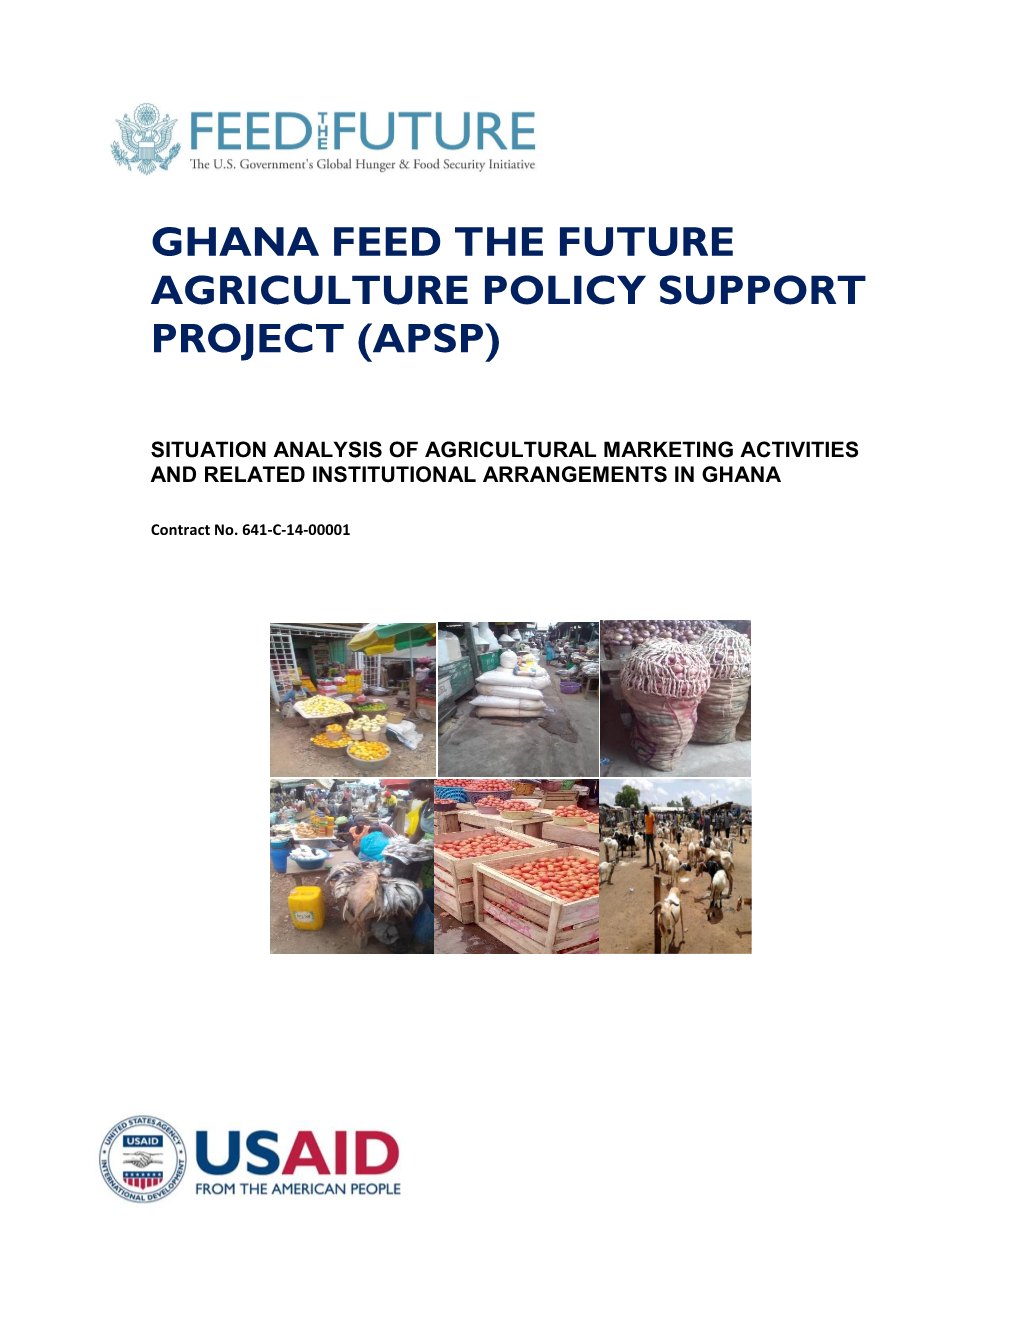 Ghana Feed the Future Agriculture Policy Support Project (Apsp)